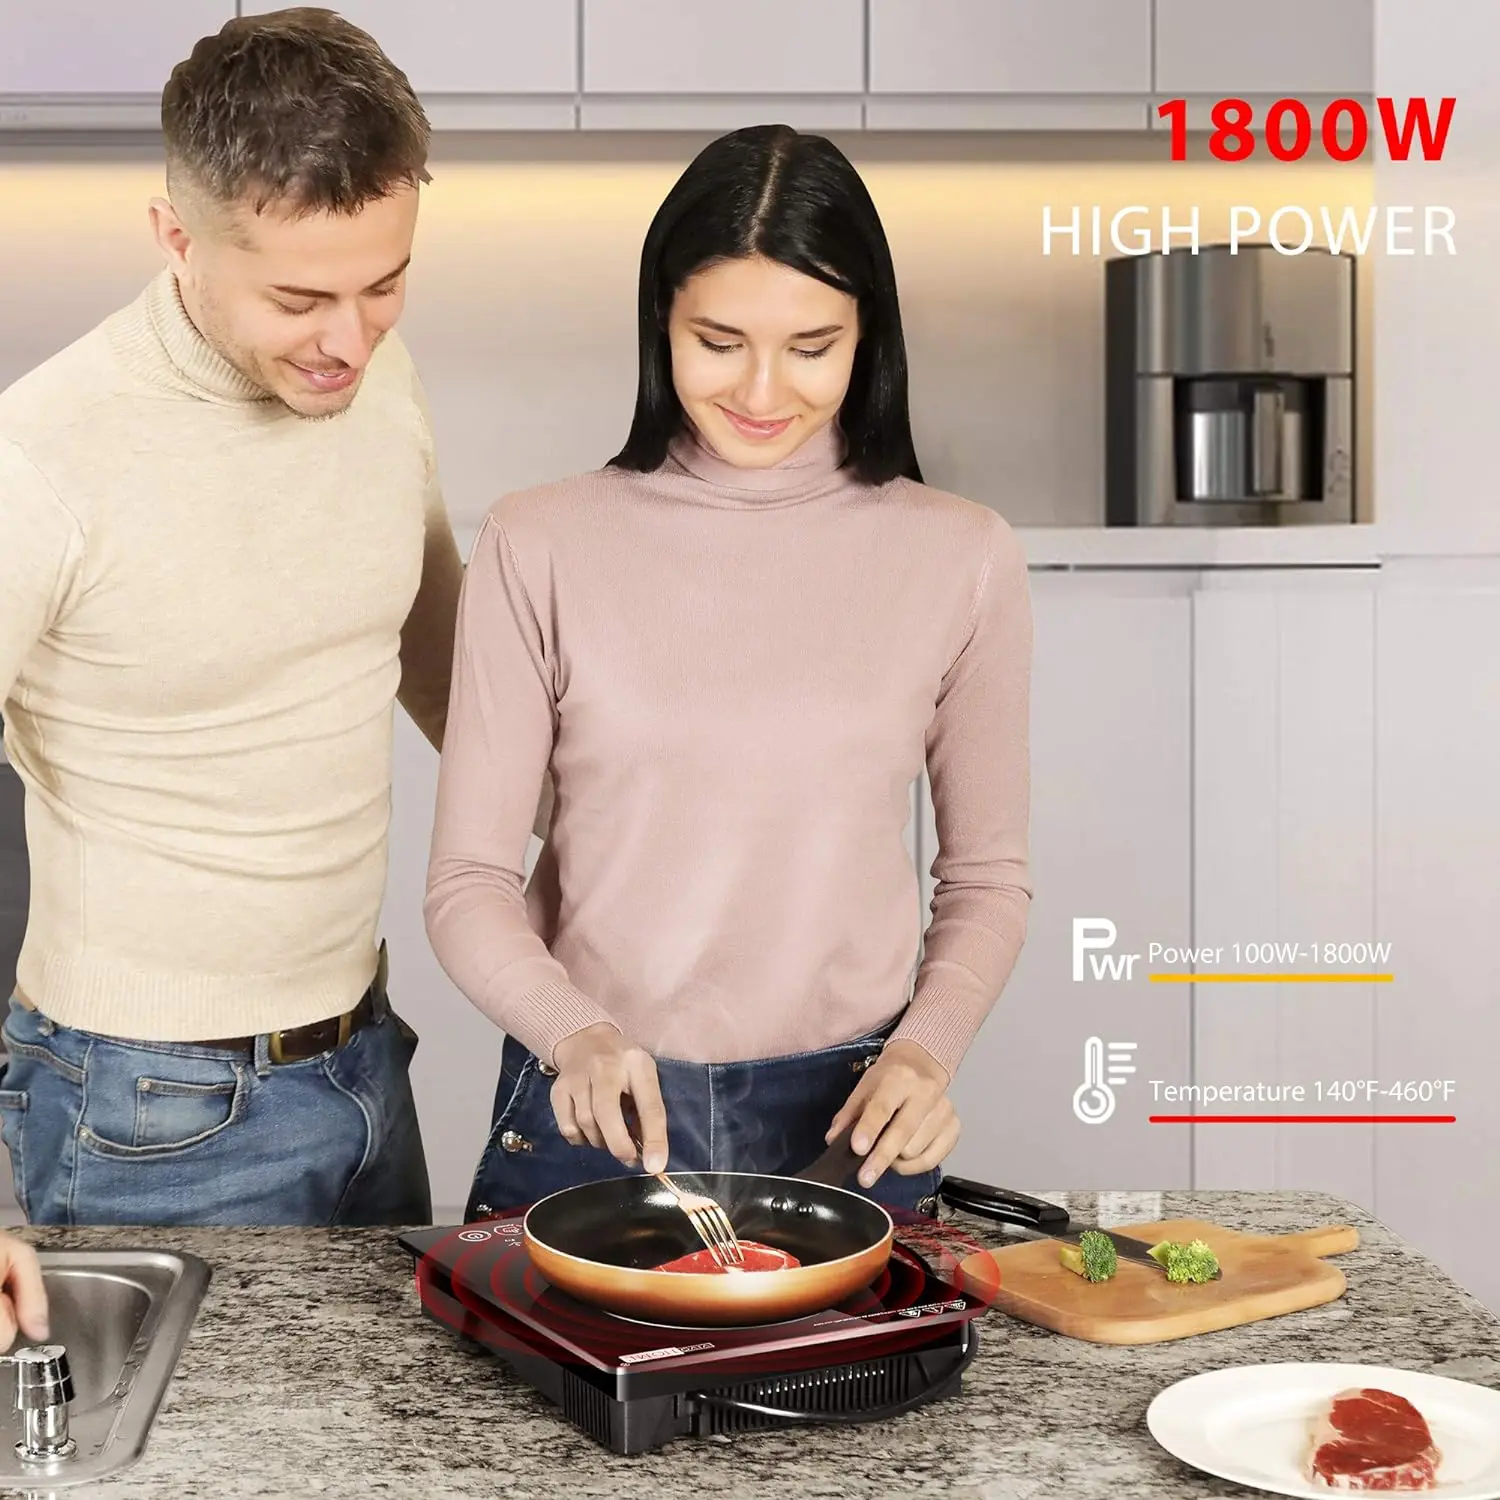 

1800W Portable Induction Cooktop with 8 Preset Buttons, Sensor Touch Countertop Burner with 180-Min Countdown Timer and 0-24H T